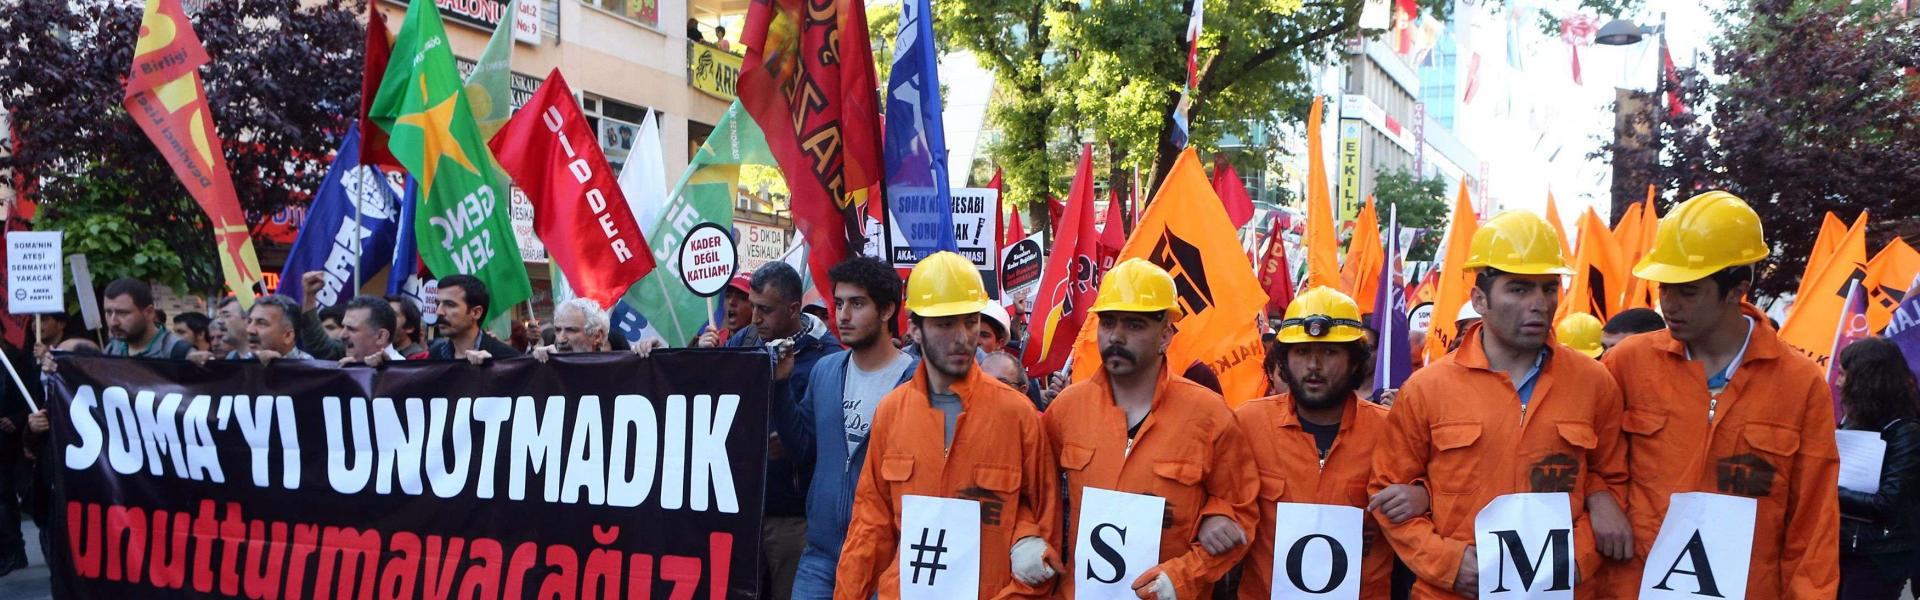 Turkey’s Soma mining disaster commemorated on fifth anniversary